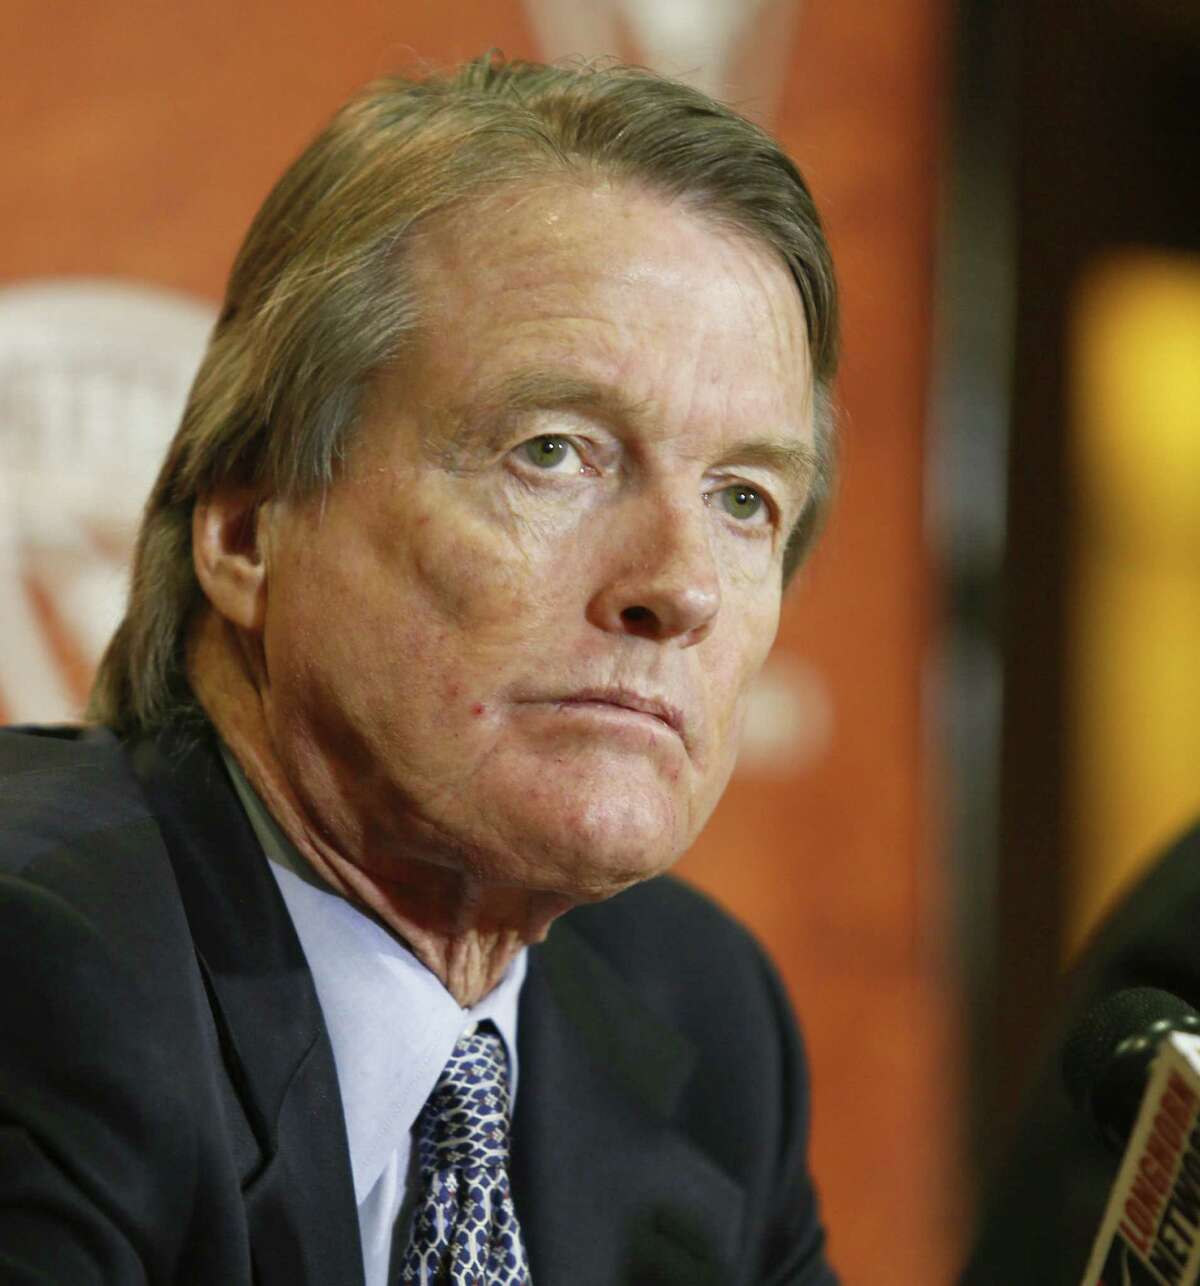 University of Texas president Bill Powers discusses the search for a new head football coach in Austin, Texas on Sunday, Dec. 15, 2013. Current coach Mack Brown announced he was stepping down from the position following the Valero Alamo Bowl on Dec. 30. (AP Photo/Jack Plunkett)